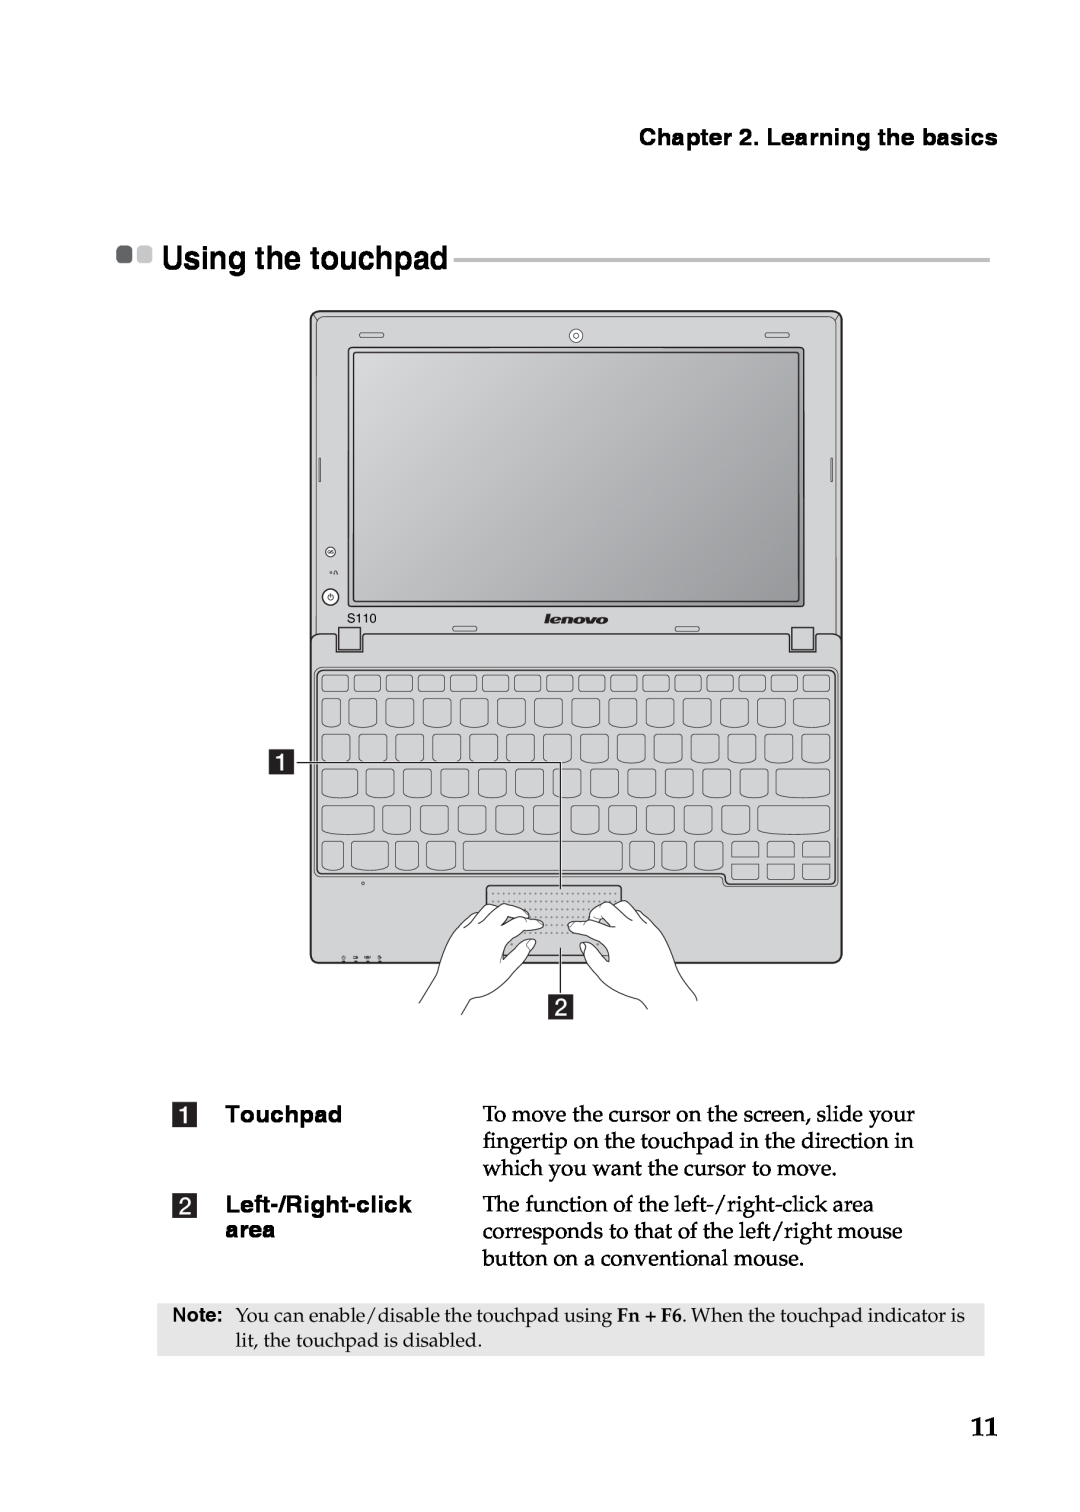 Lenovo S110 manual Using the touchpad, Touchpad Left-/Right-clickarea, Learning the basics 